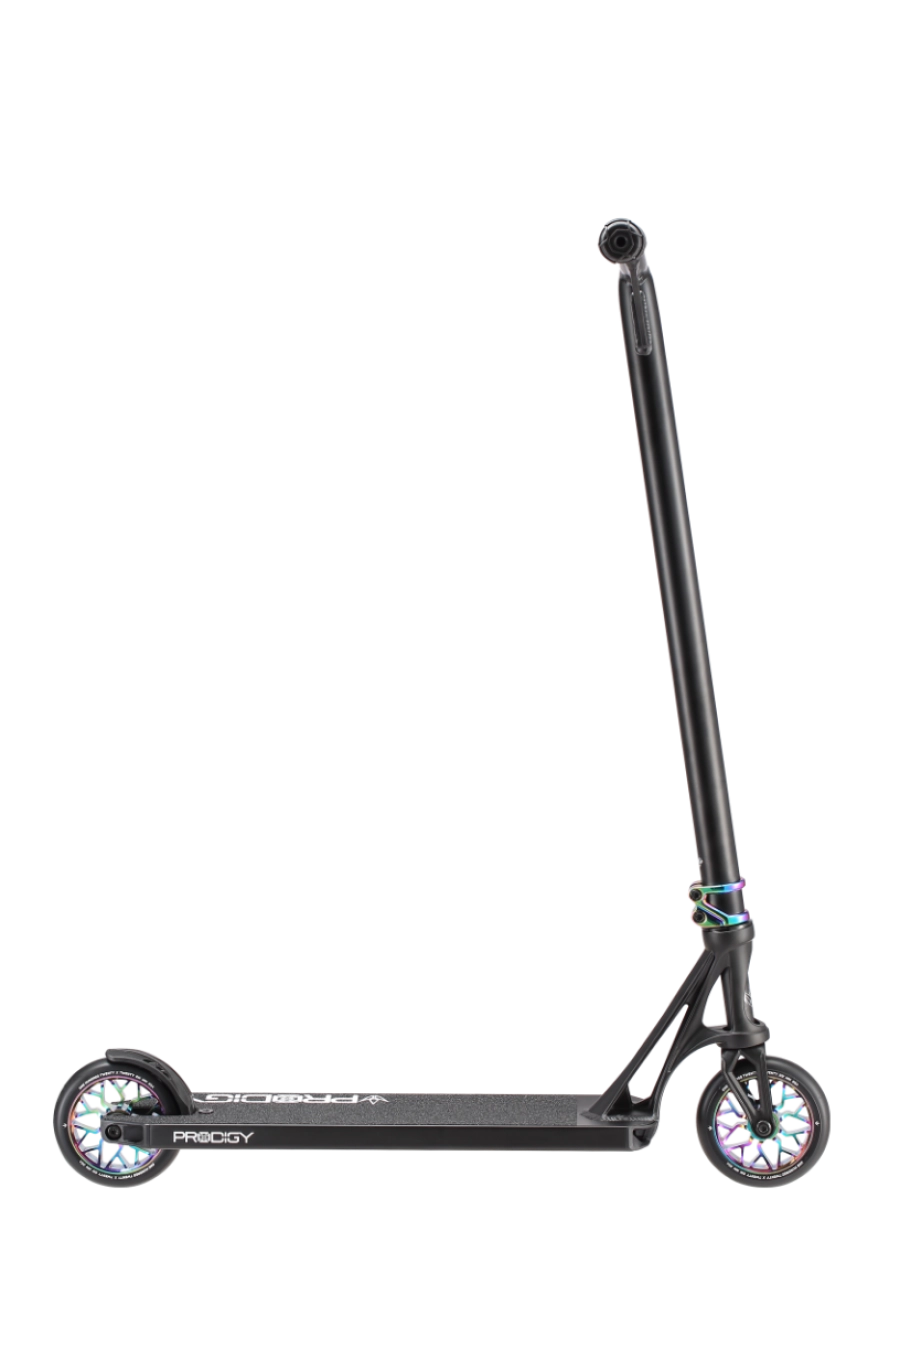 BLUNT PRODIGY X stunt scooter